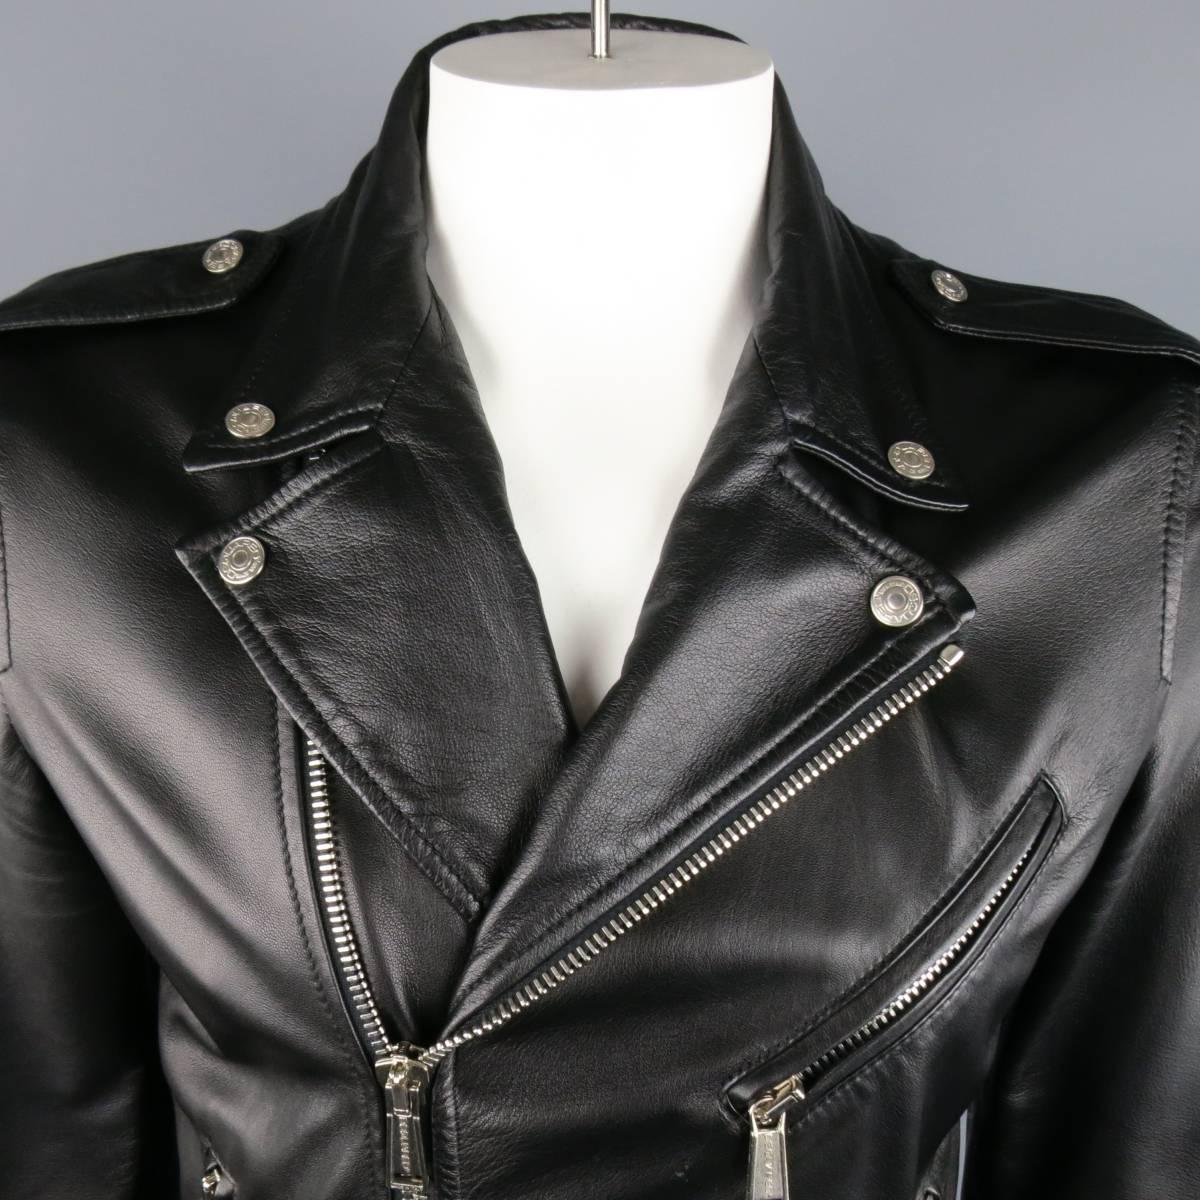 Classic DSQUARED2 motorcycle jacket in an ultra soft black lambskin leather and featured pointed lapels with silver tone logo engraved snaps, asymmetrical, oversized double zip closure, triple zip pockets with engraved logo tabs, snap pocket,